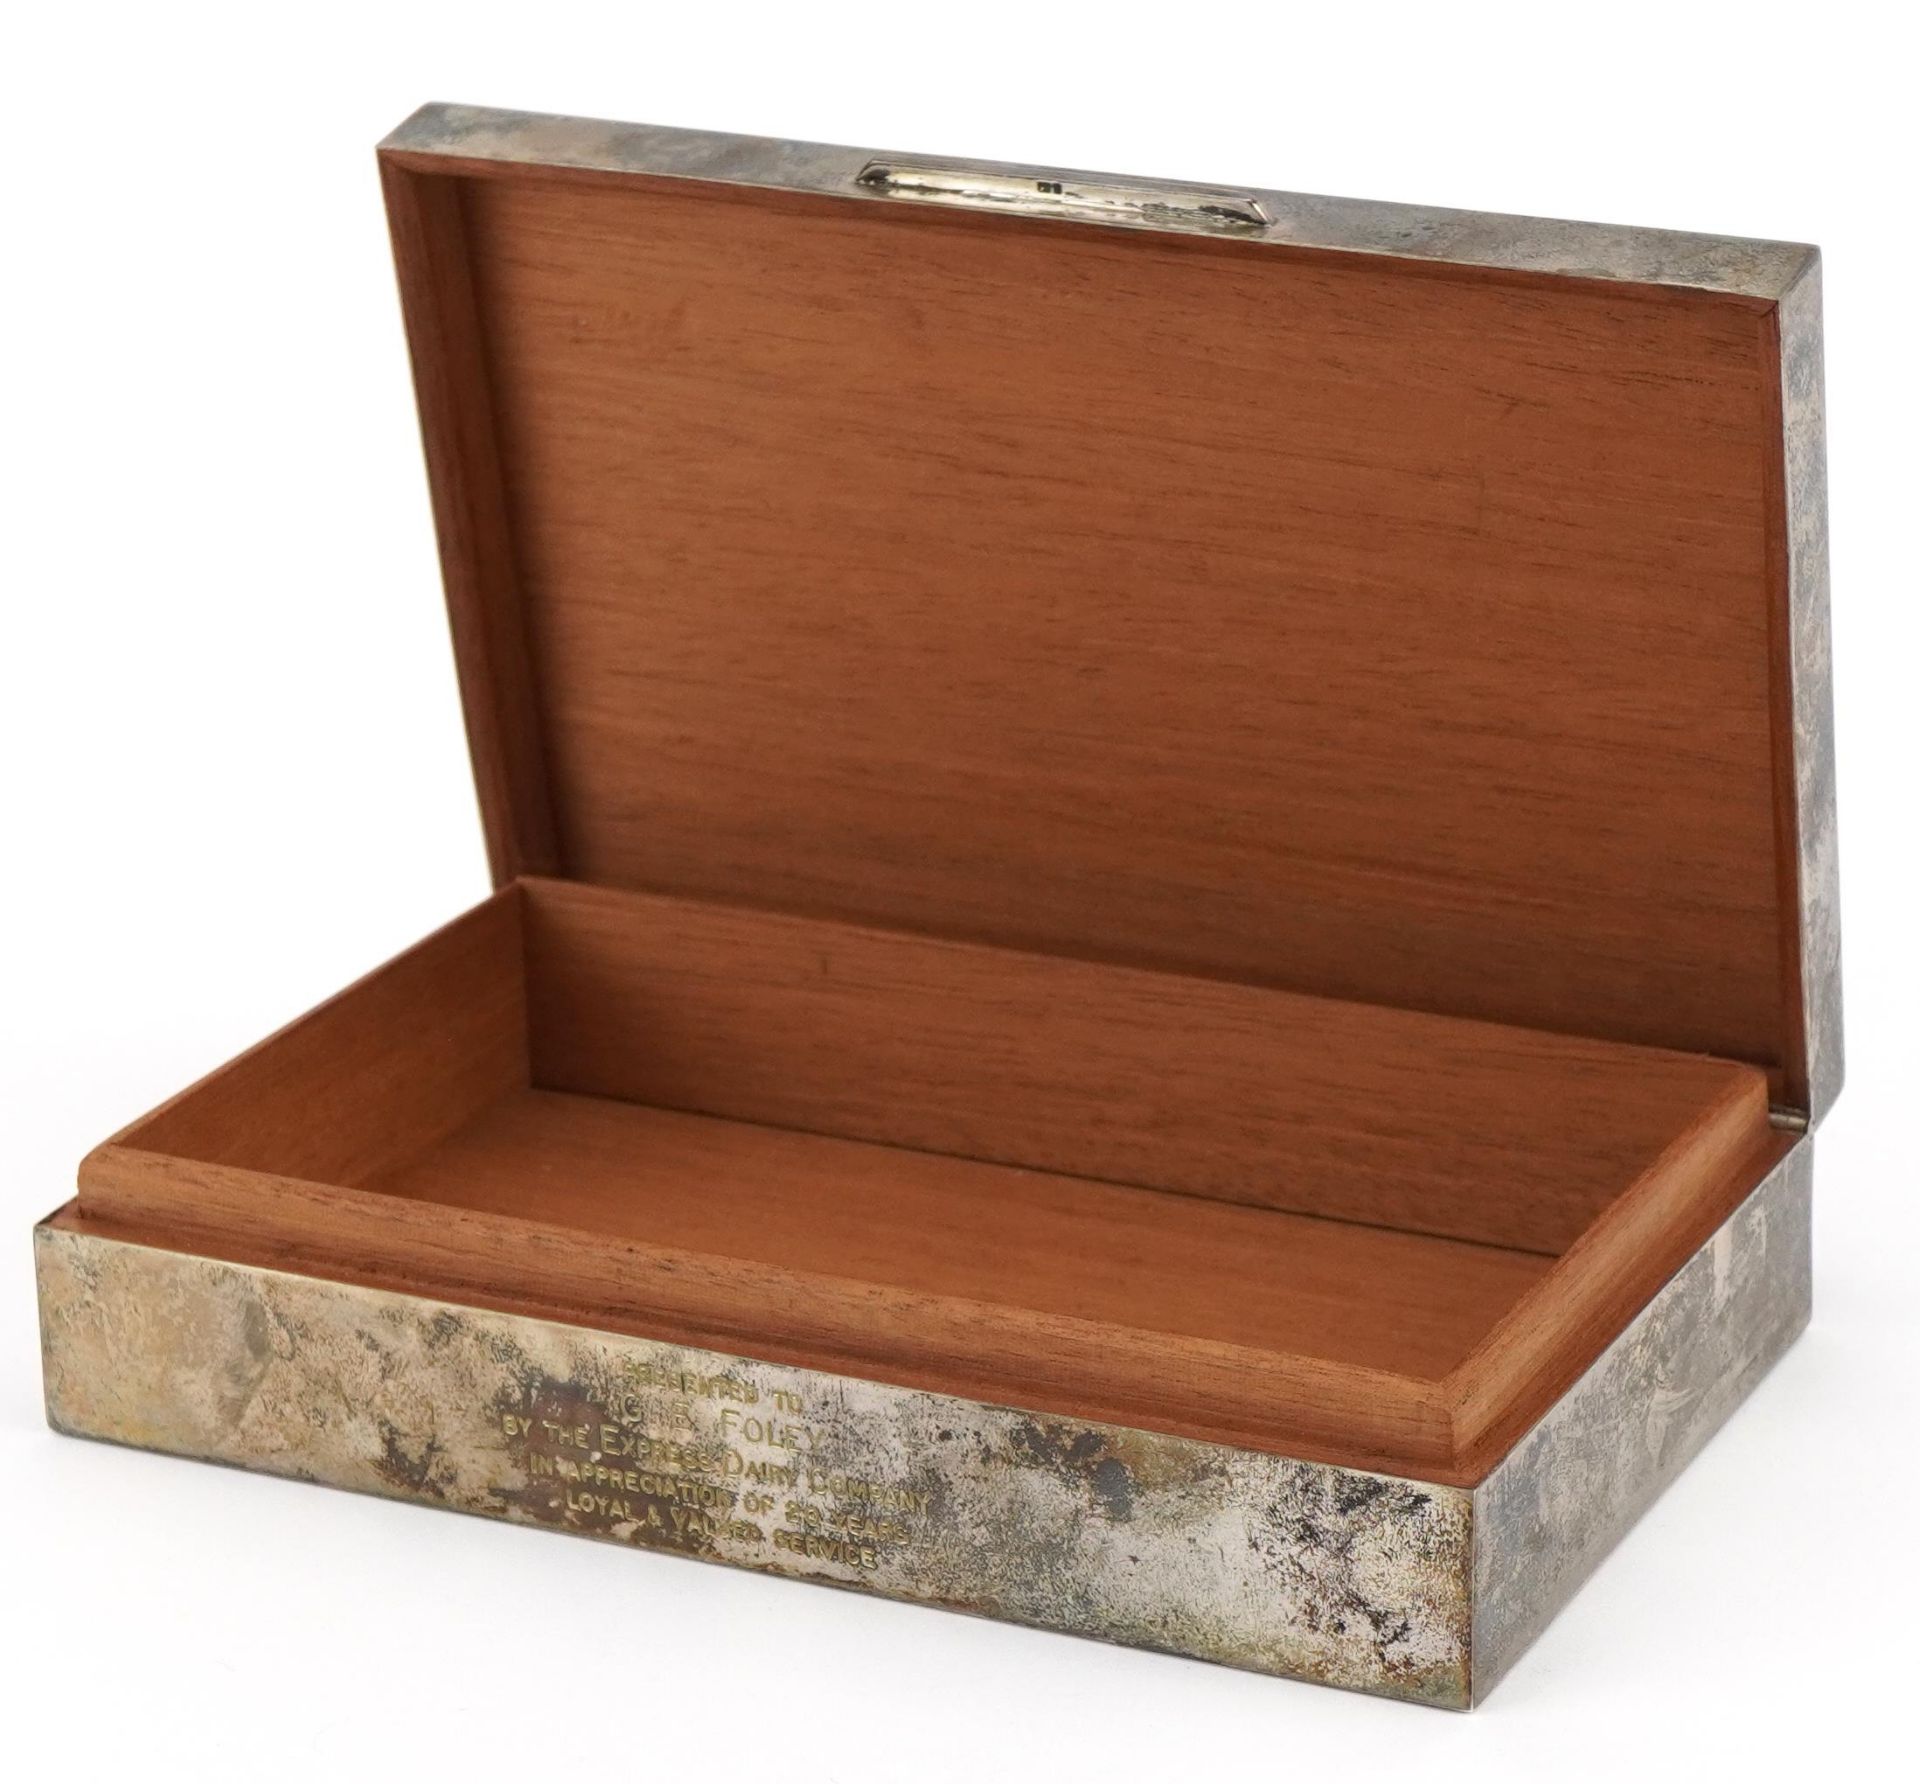 Cohen & Charles, Edward VII rectangular silver cigar box, the hinged lid with engine turned - Image 2 of 5